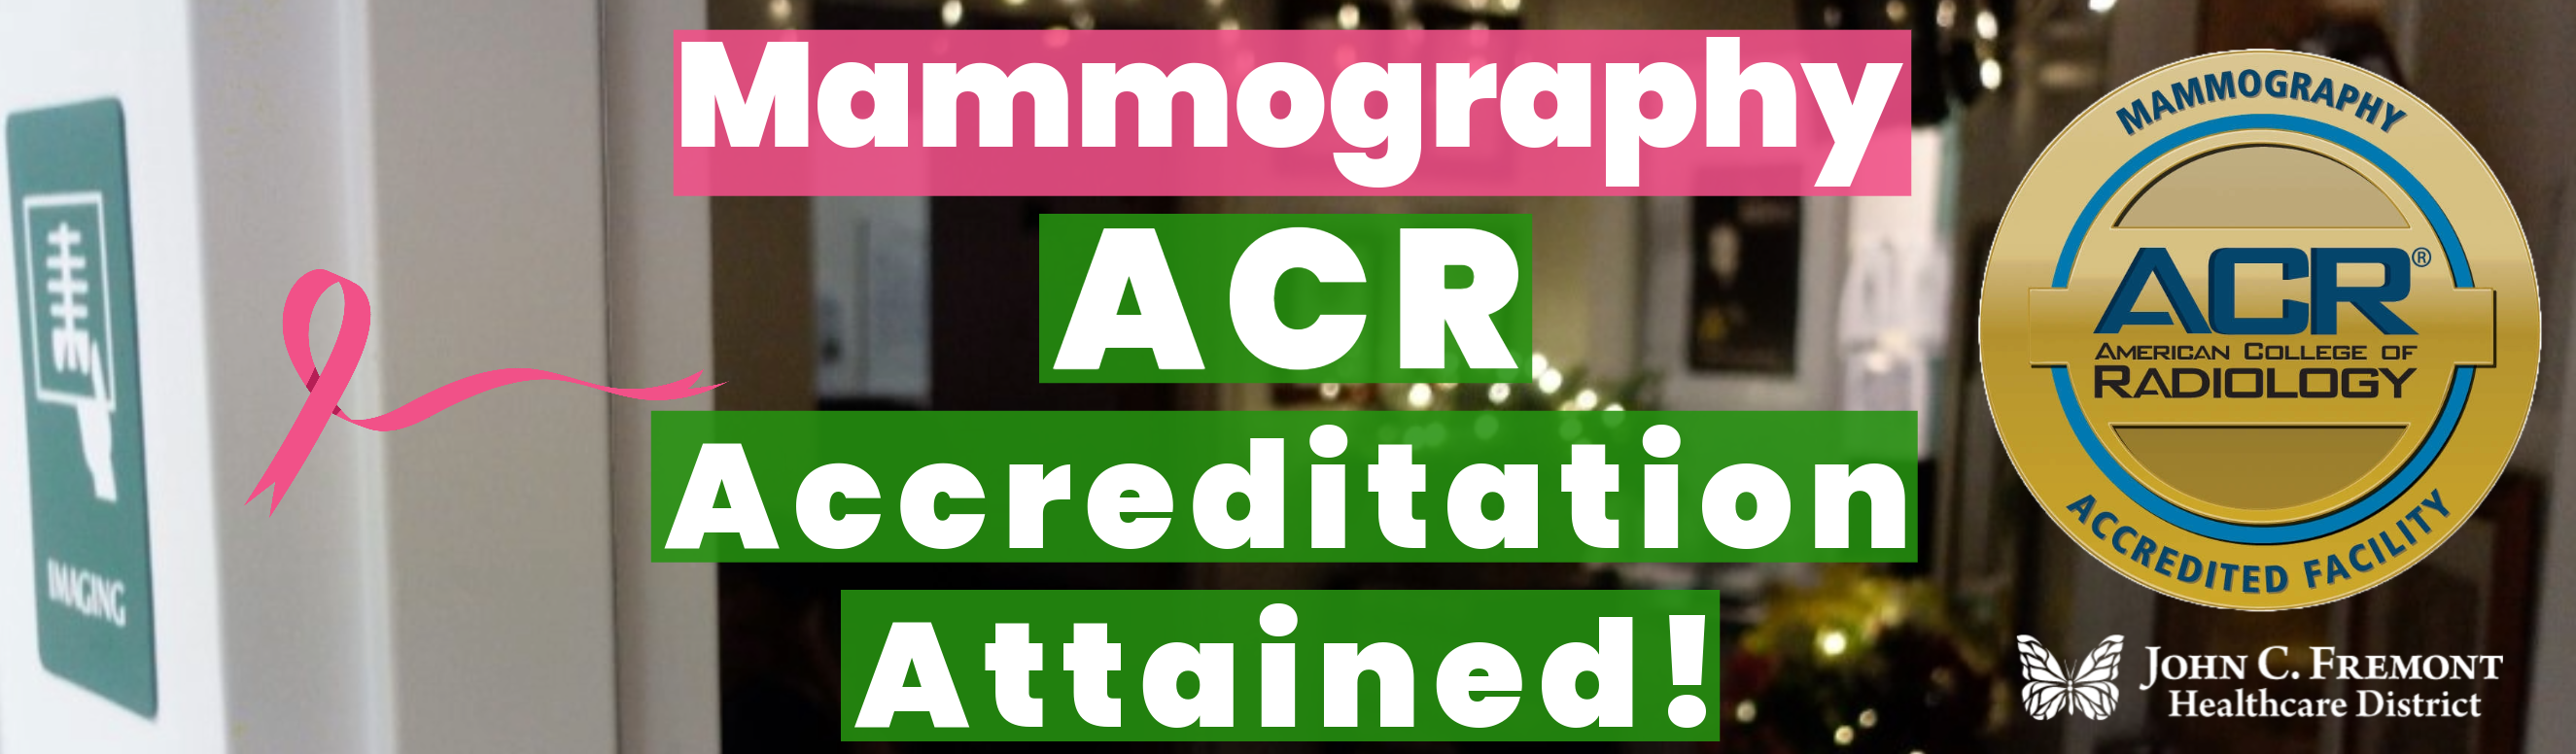 JCFHD is now an ACR (American College of Radiology) Mammography Accredited Facility!